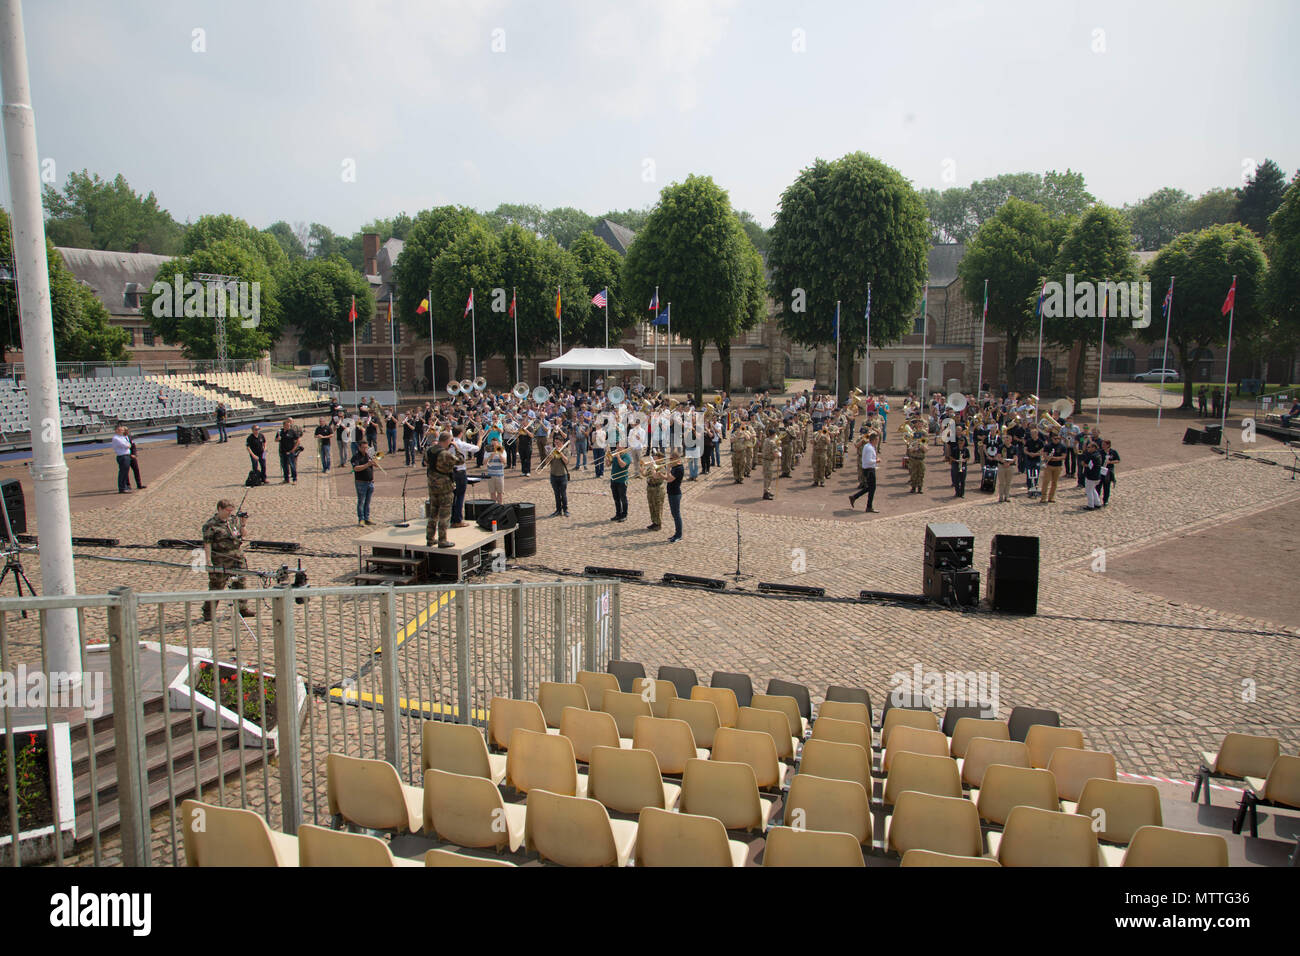 The mass international bands rehearse for the Citadelle 350 anniversary military show.  US Army photo by Sgt Joseph Agacinski/released. Stock Photo